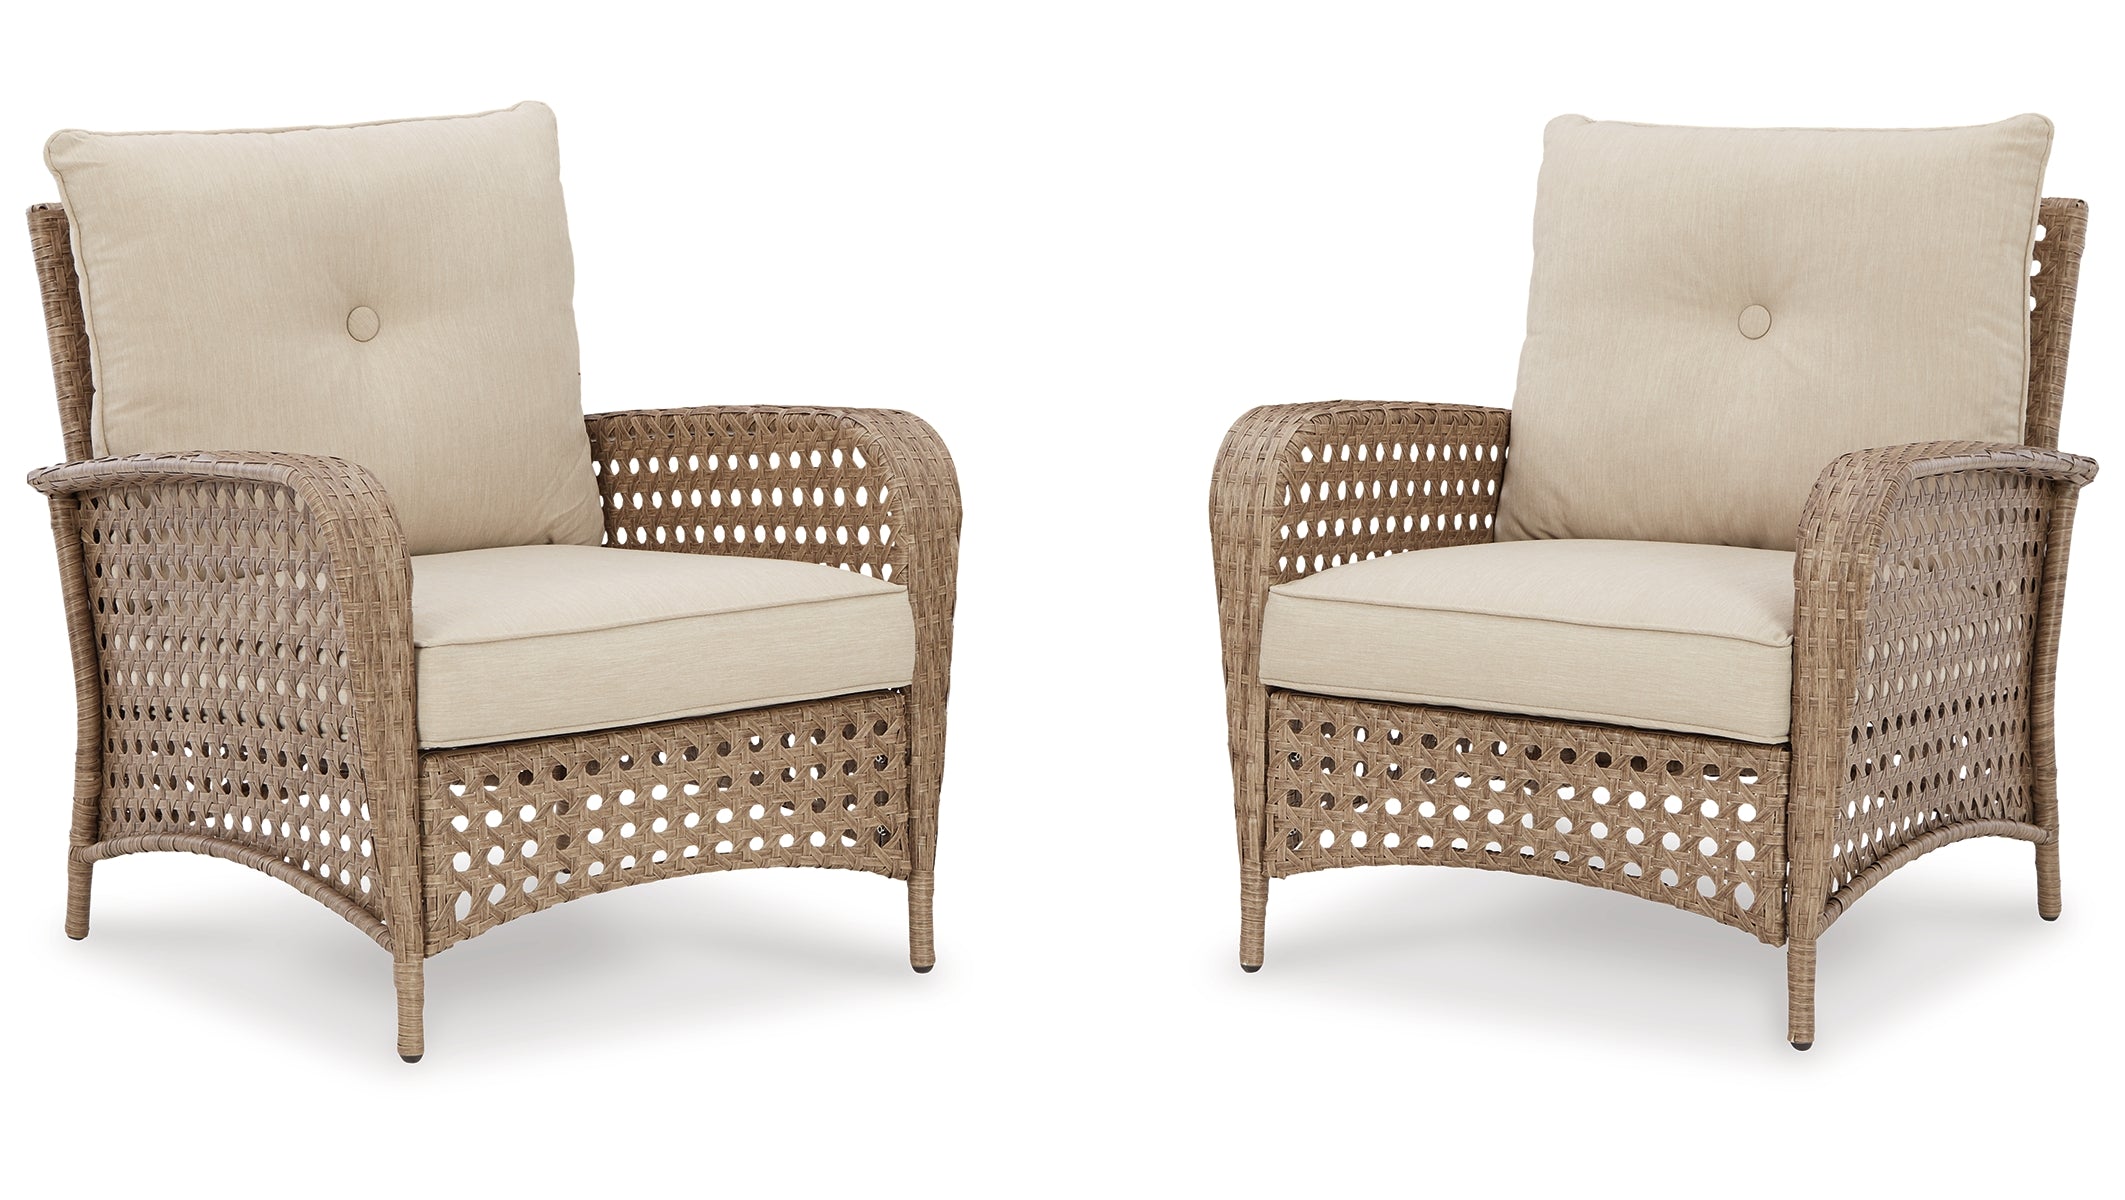 Braylee Lounge Chair with Cushion (Set of 2)